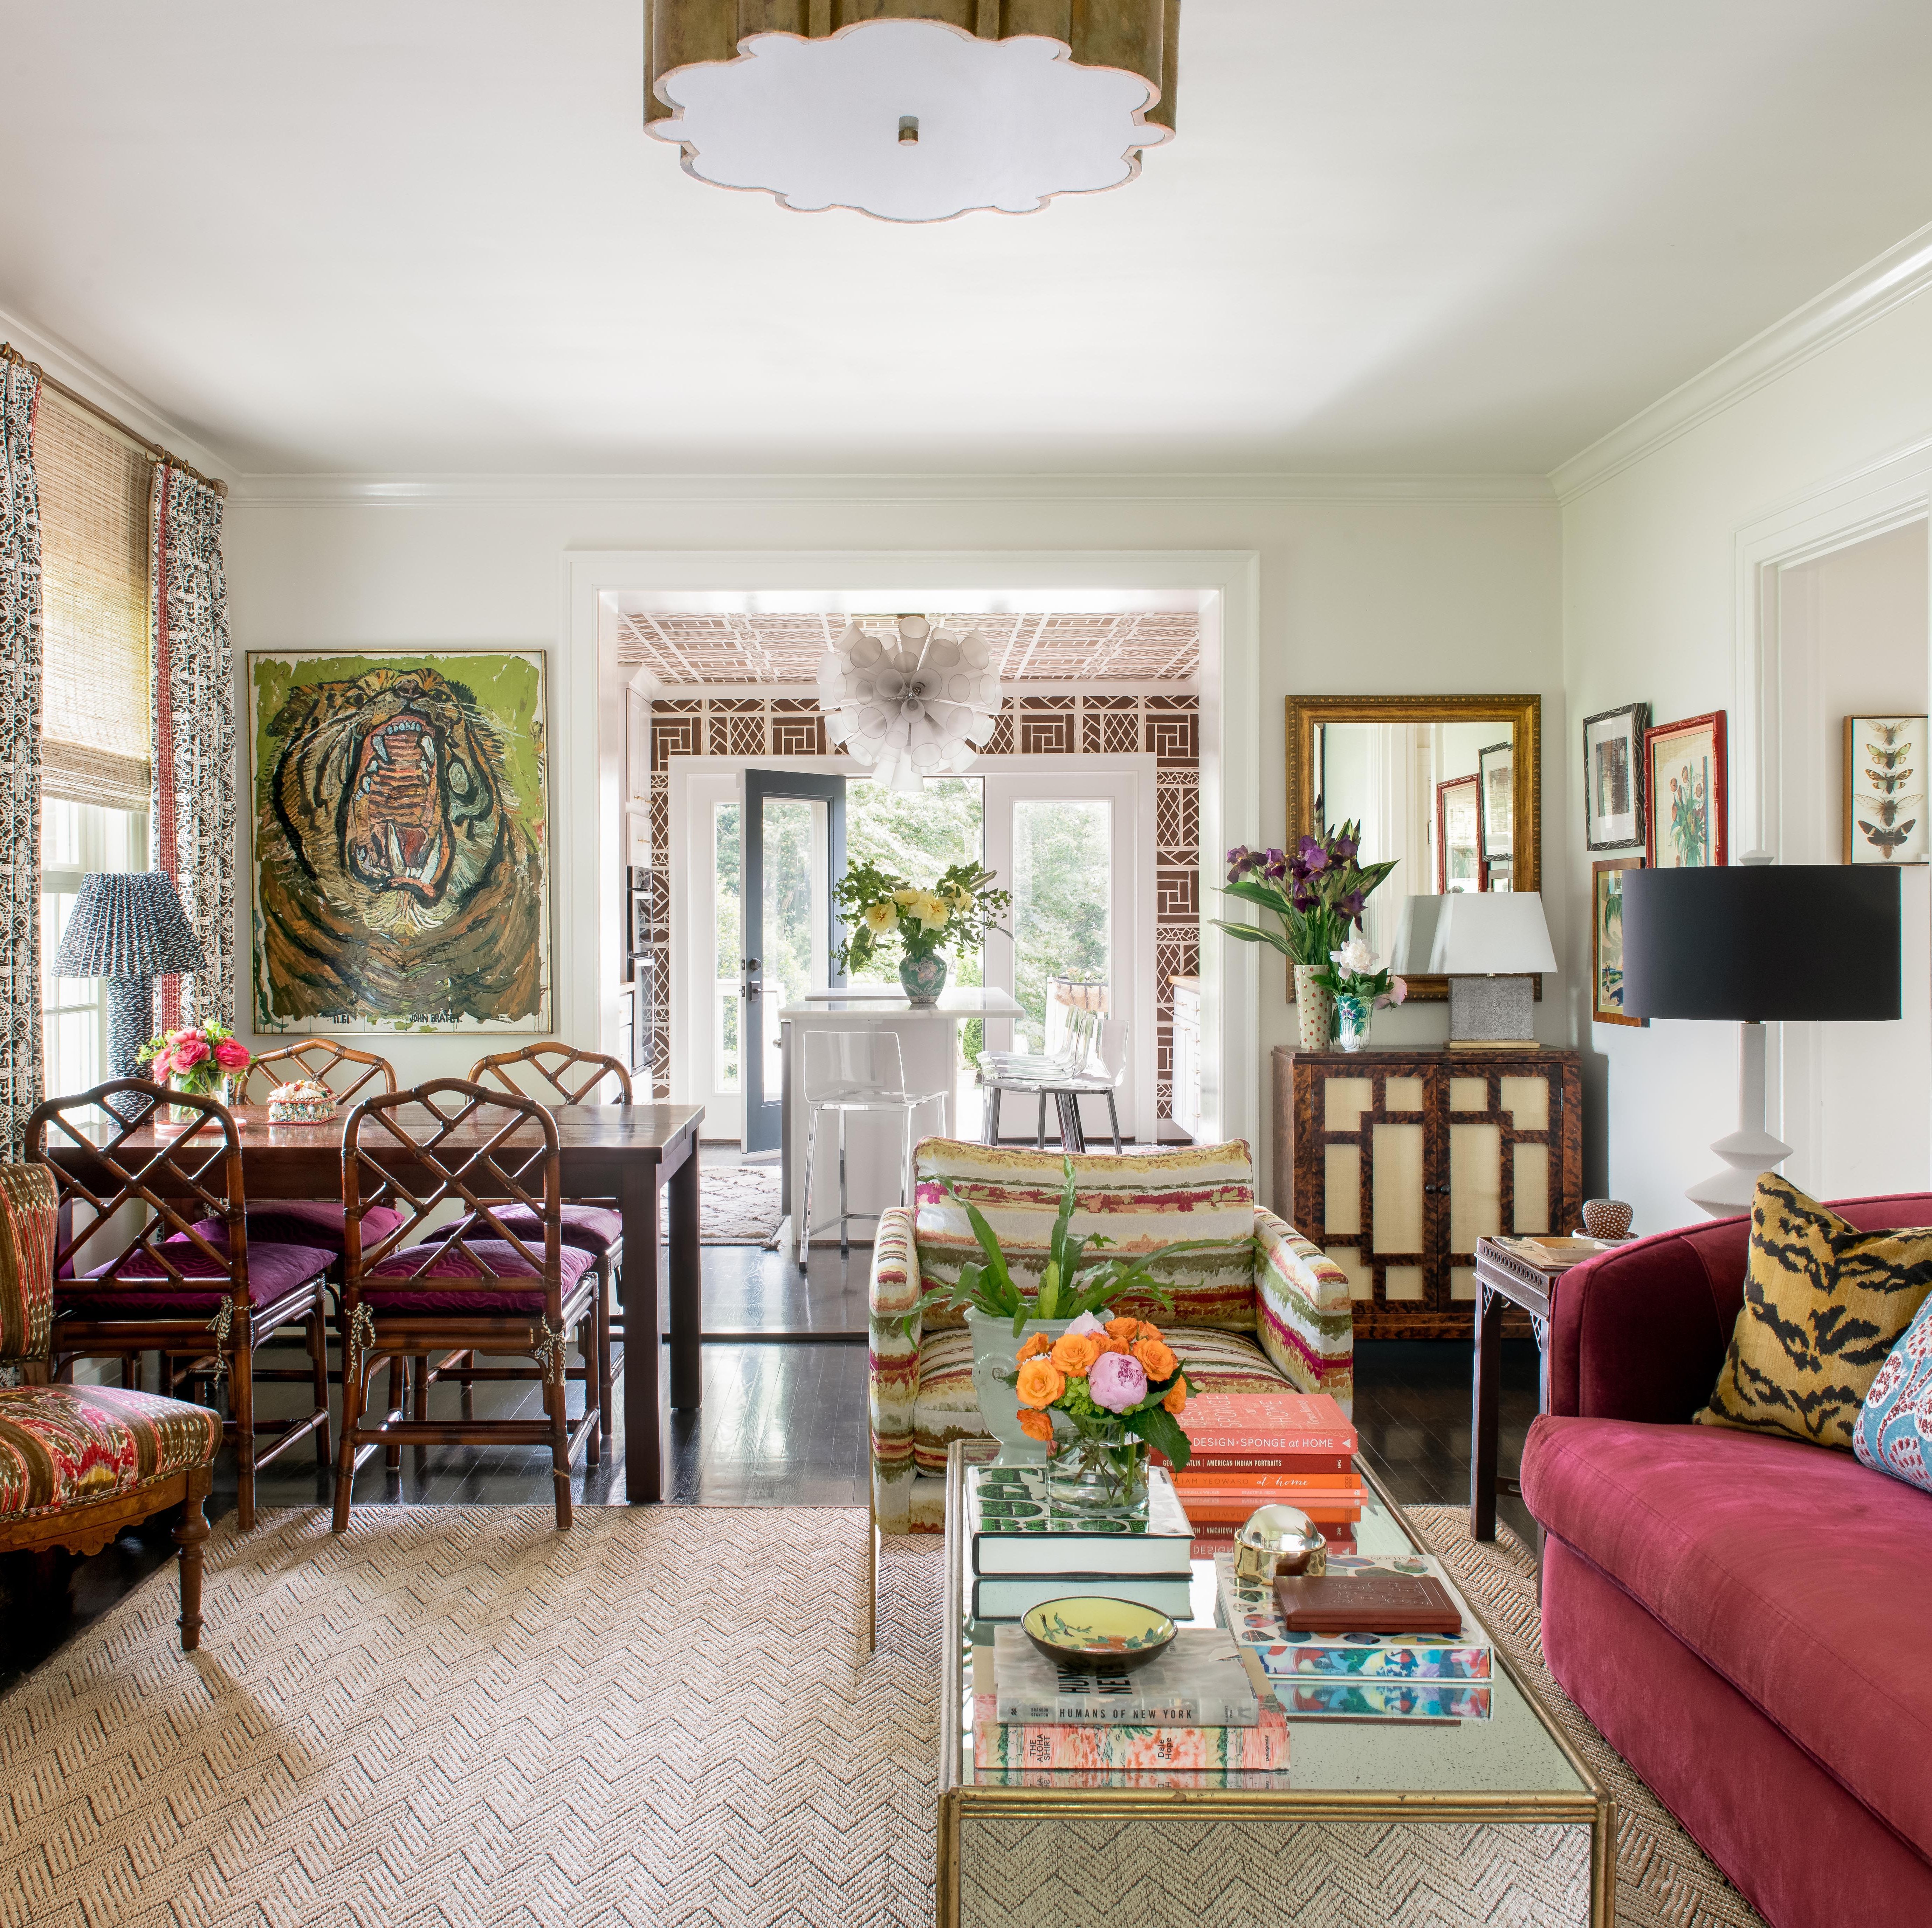 Isabel Ladd's Maximalist Home in Lexington, Kentucky, Has Tons of DIY Ideas